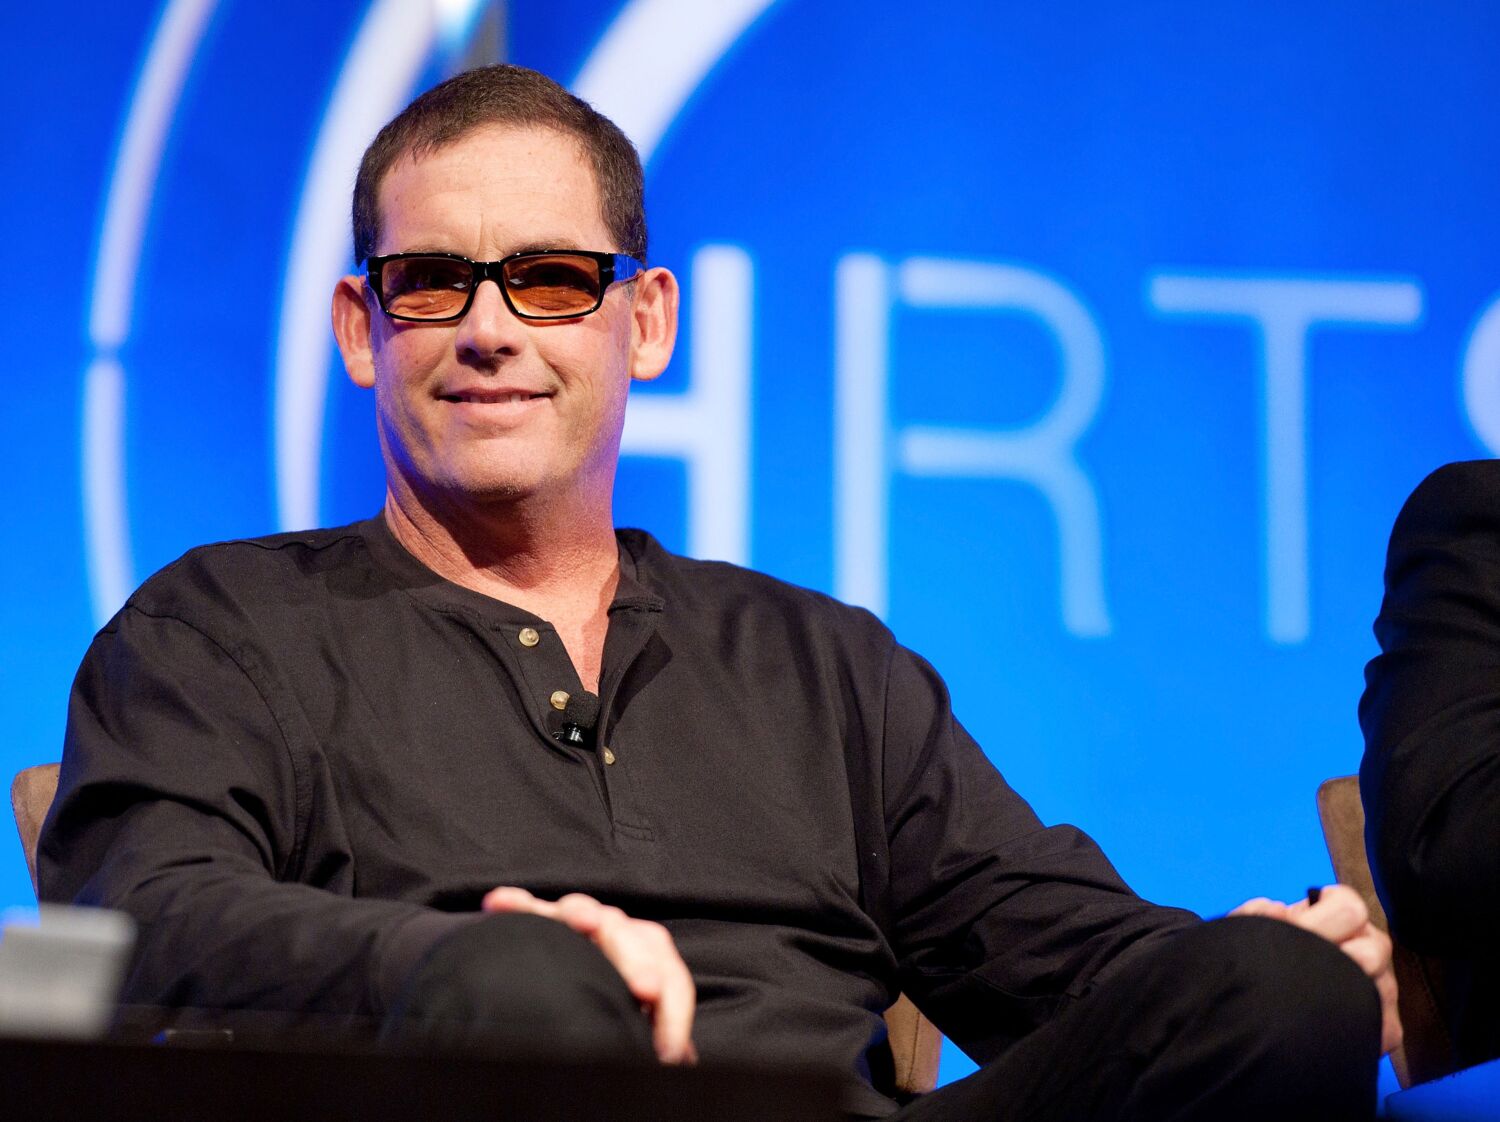 Controversial 'Bachelor' creator Mike Fleiss steps down after more than two decades